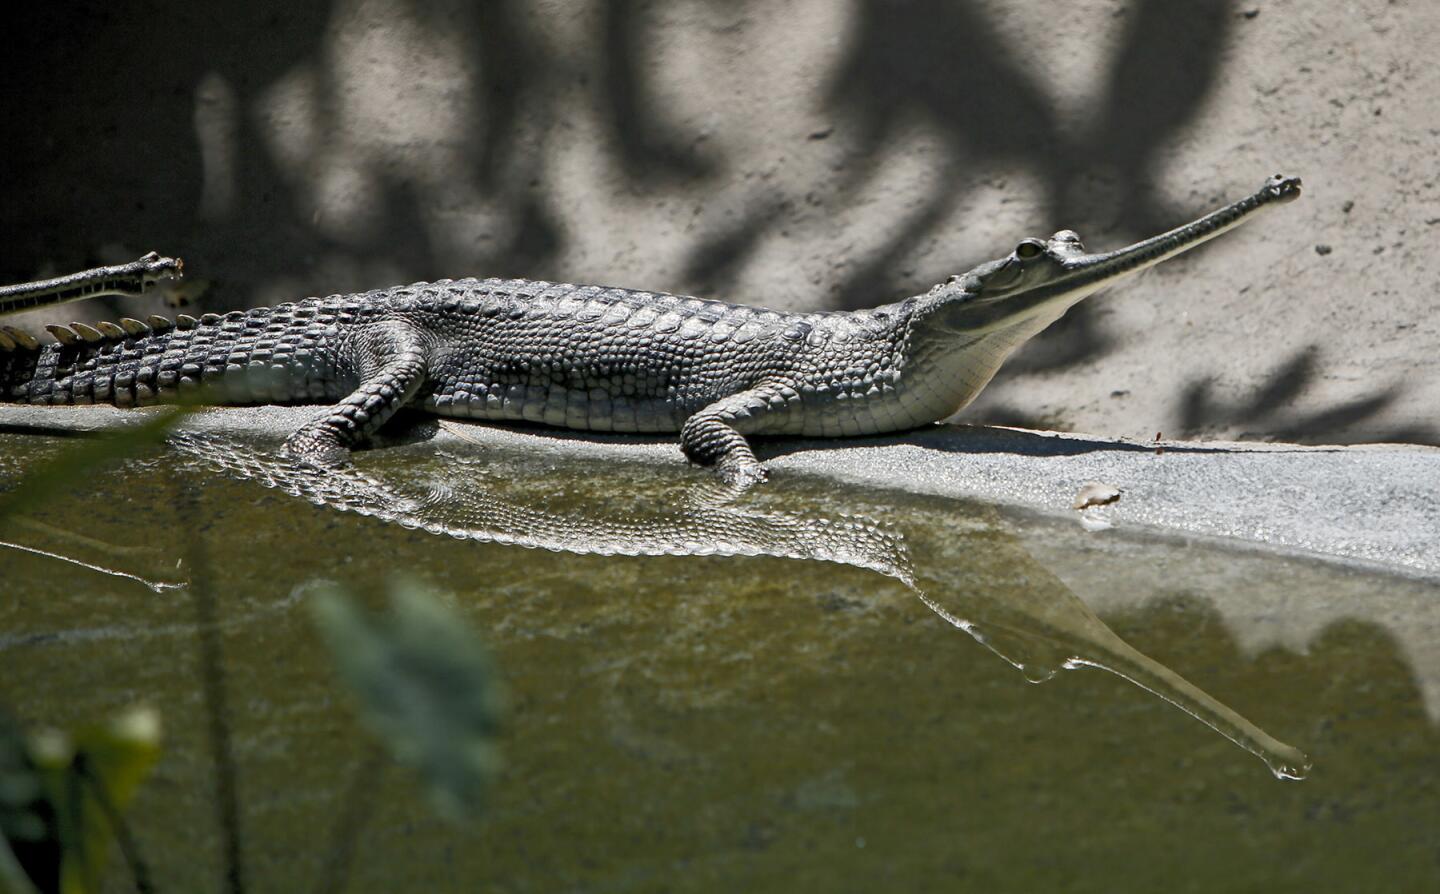 The Los Angeles Zoo held a media day to show off their four India Gharials, a species of critically endangered crocodiles, at the landmark location in Griffith Park, in Los Angeles, on Thursday, May 4, 2017. One male and three females, from a larger group hatched in Madras, India, were sent to the L.A. Zoo, which becomes only one of nine zoos in the Western hemisphere to house the Gharials. These crocodiles have a "long snout filled with about 110 sharp, needle-like teeth made for cutting through the water and catching fish," according to the press release. The Gharials can grow up to 20 feet, making it one of the largest of all crocodilian species.